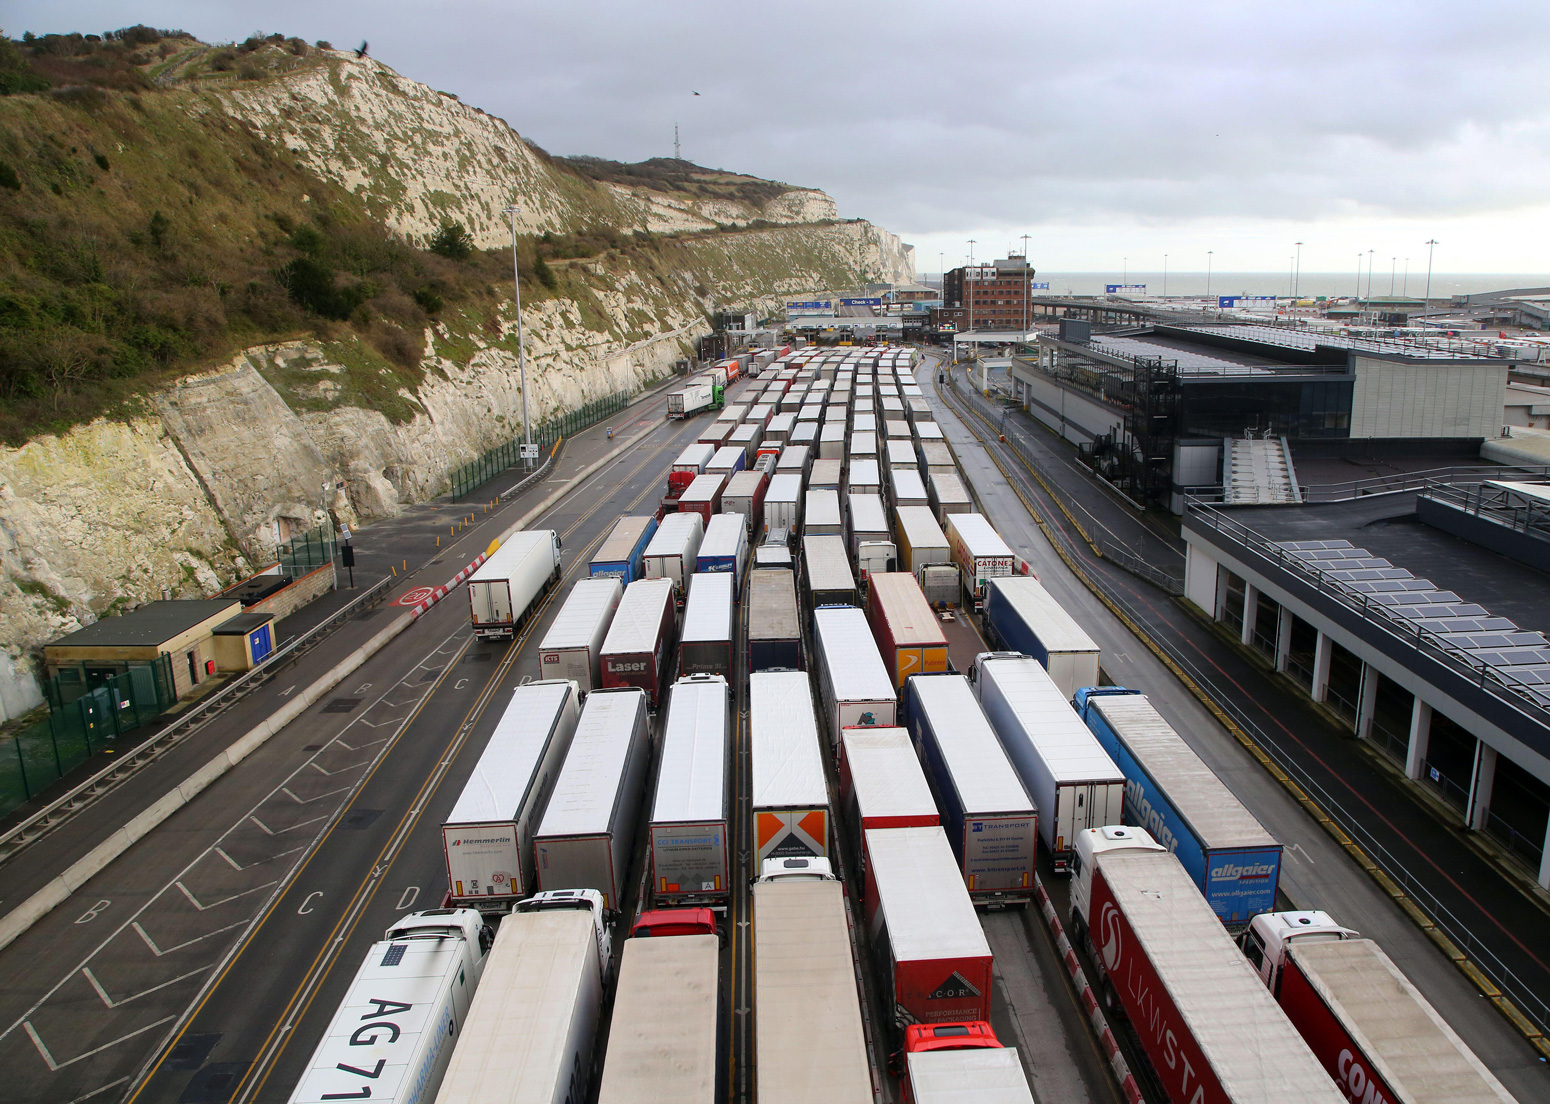 Lorries-queue-to-enter-The-Port-of-Dover-in-Kent-as-the-clock-ticks-down-on-the-chance-for-the-UK-to-strike-a-deal-before-the-end-of-the-Brexit-transition-period